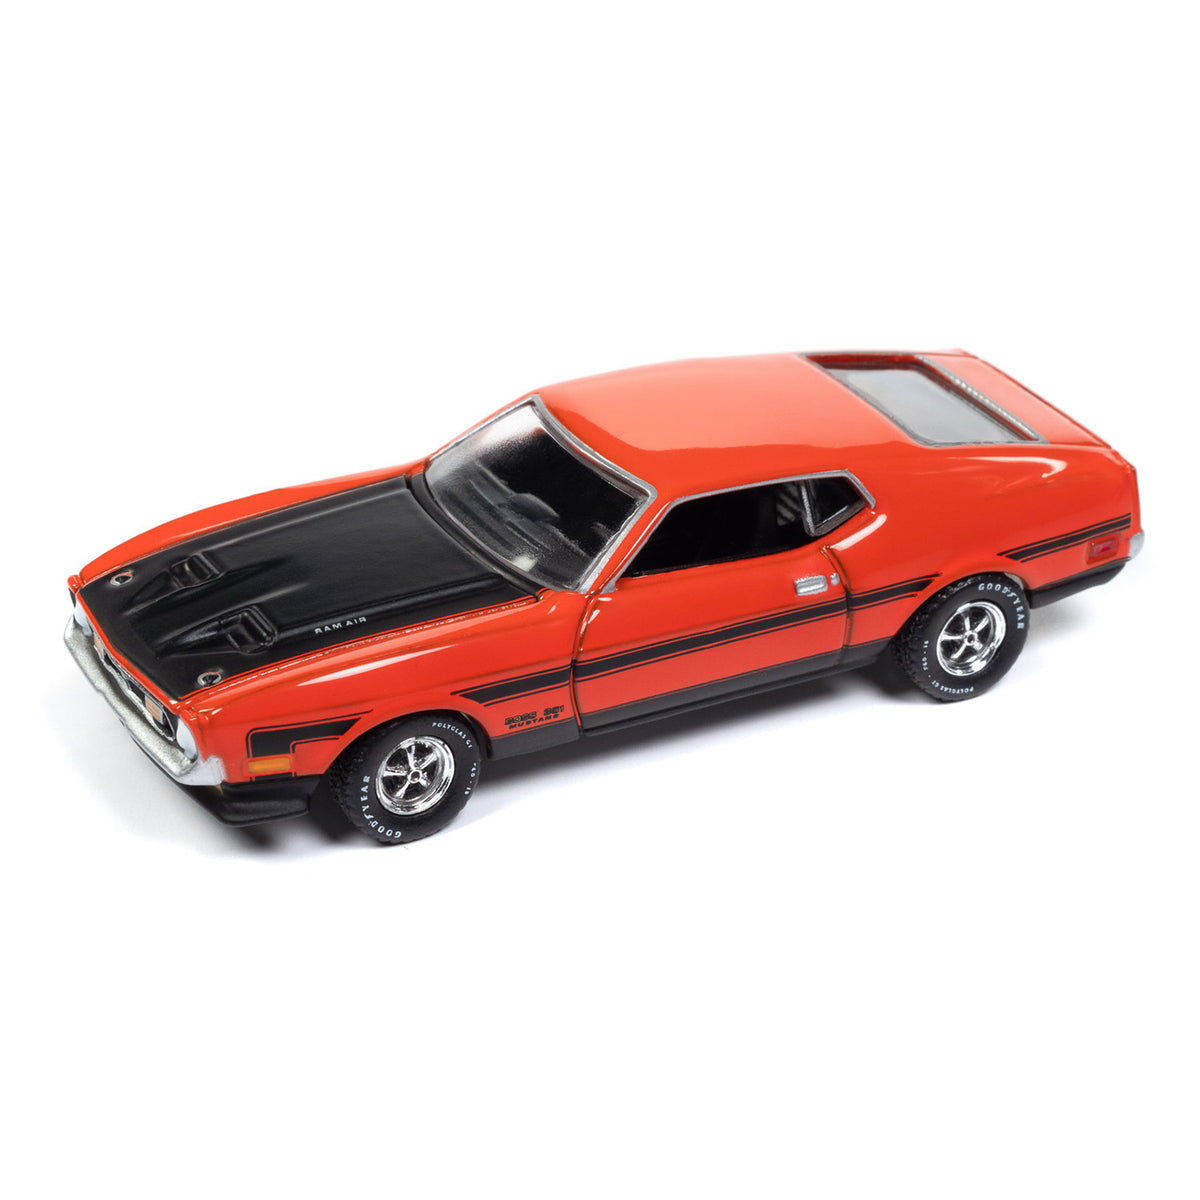 1971 Ford Mustang Boss 351 1:64 Diecast in Red and Black - Angled Left Side View